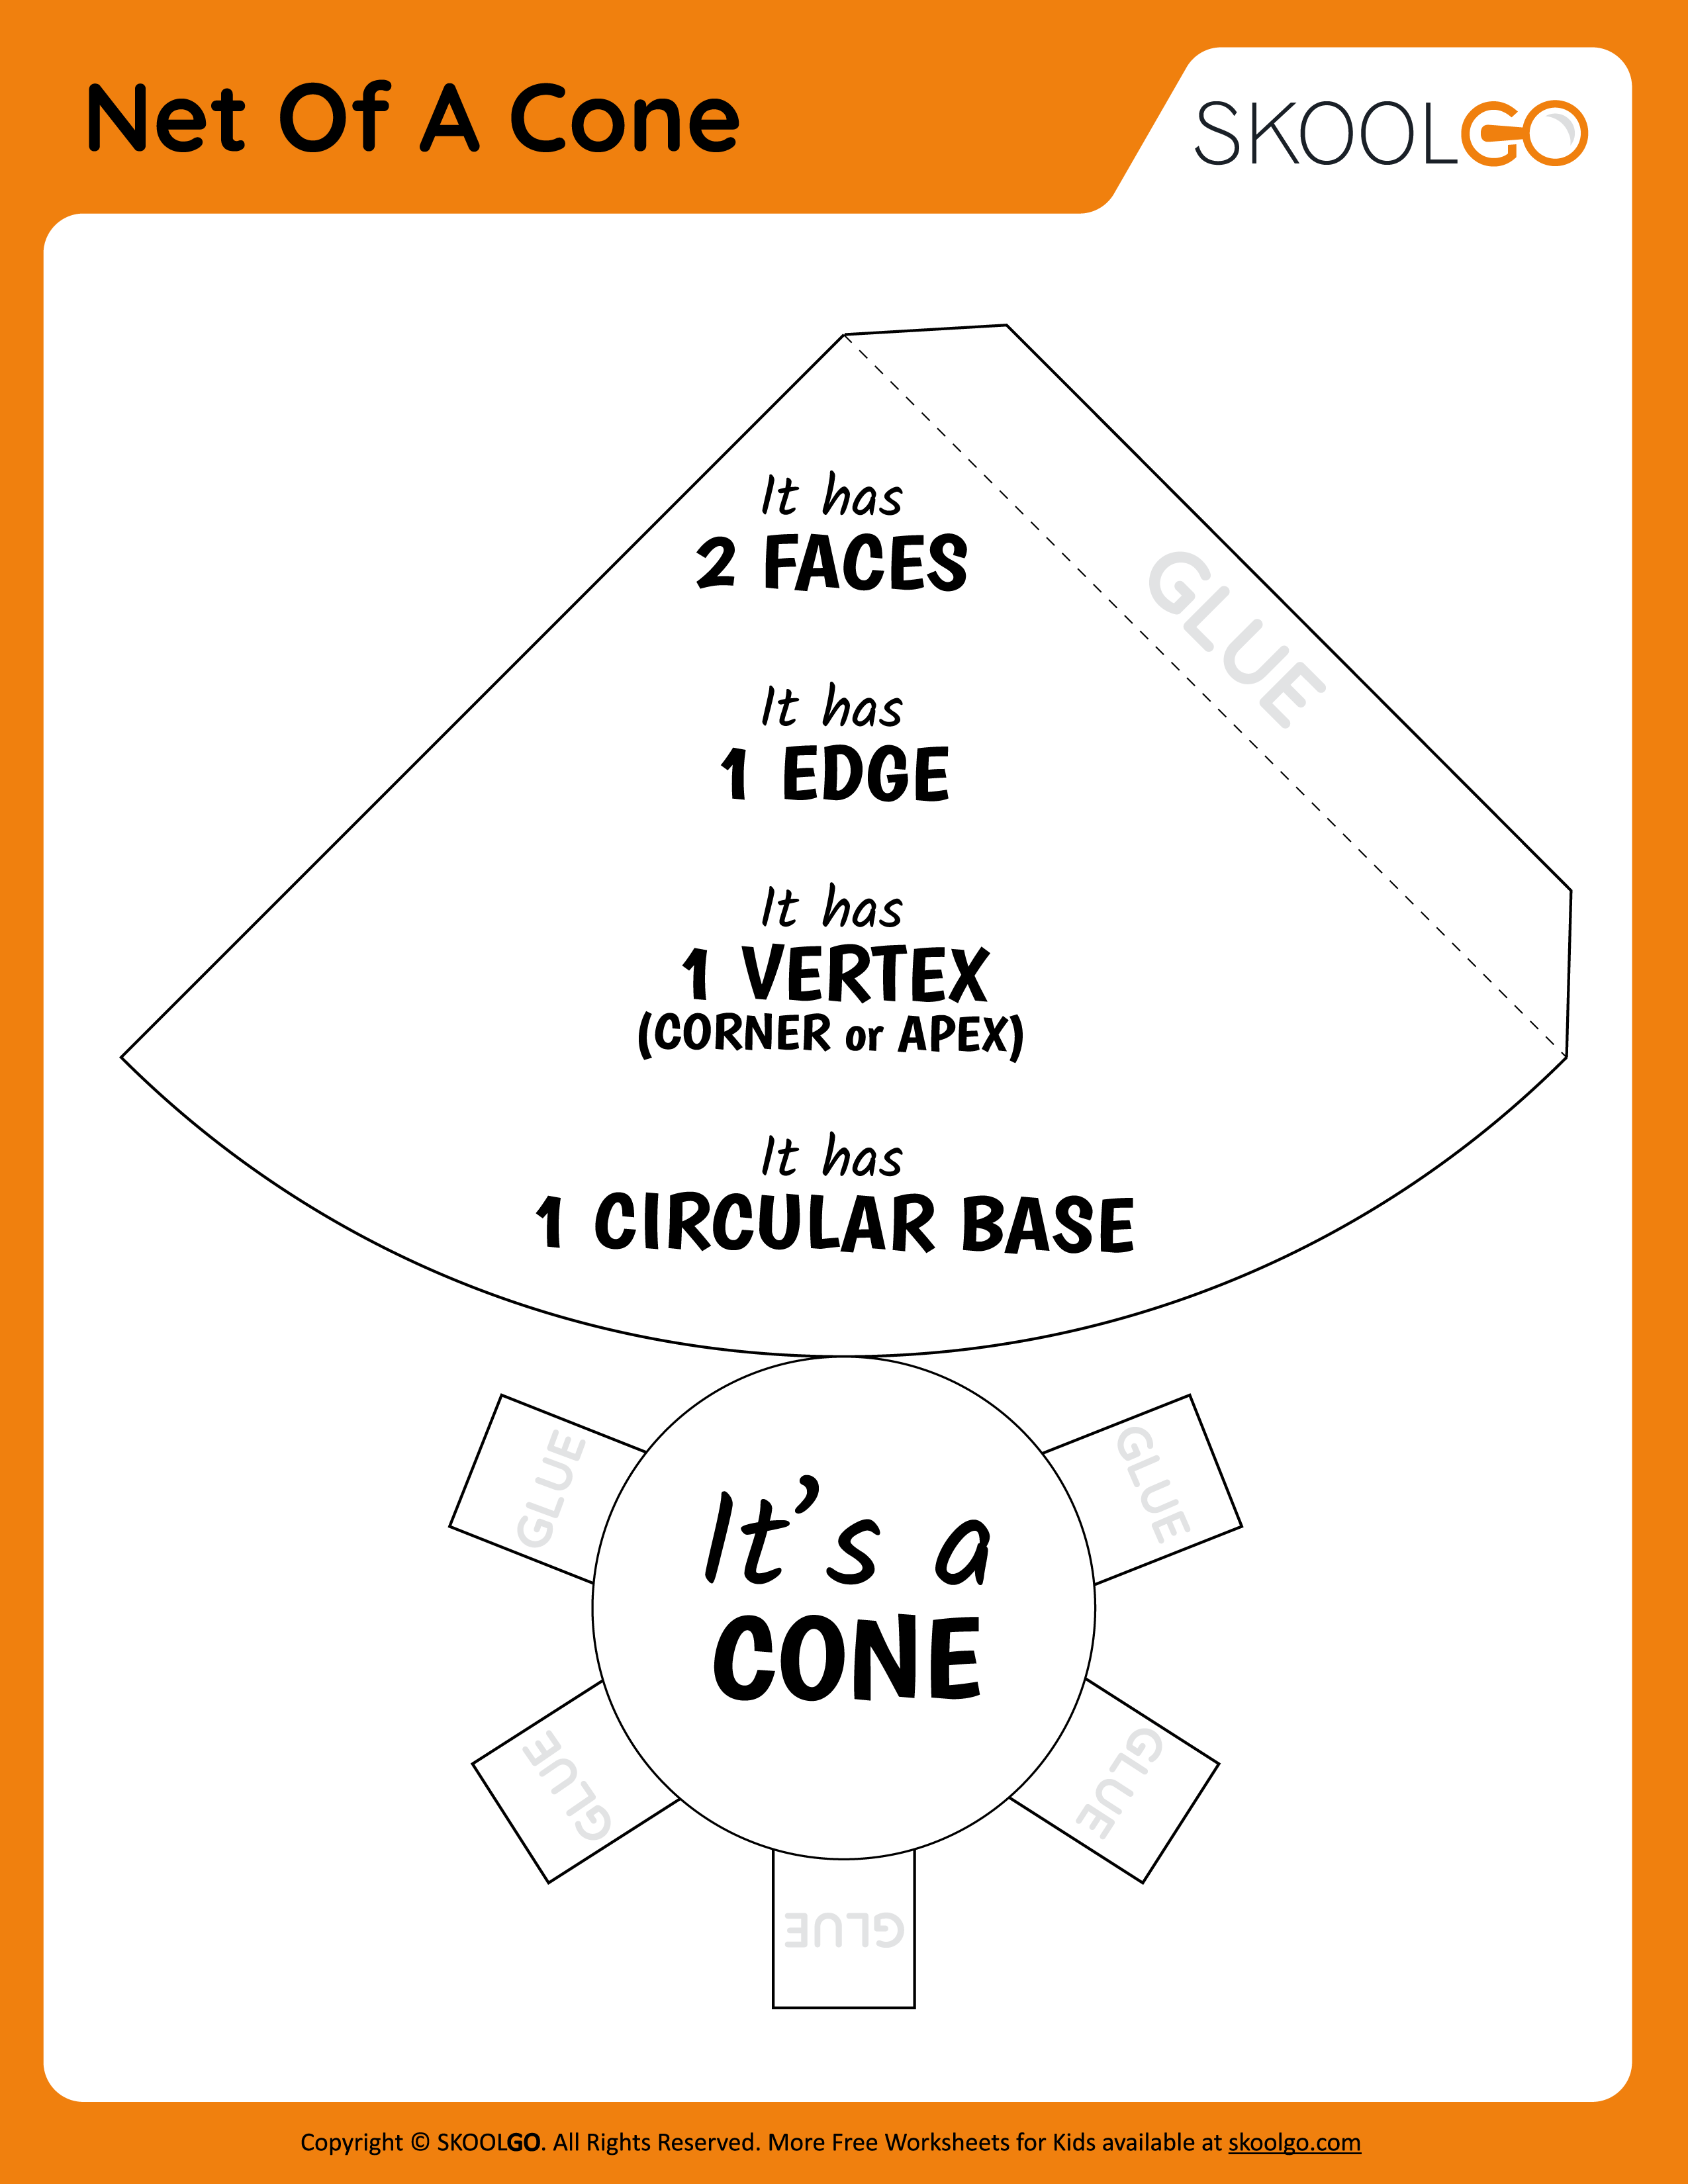 Net Of A Cone - Free Worksheet for Kids